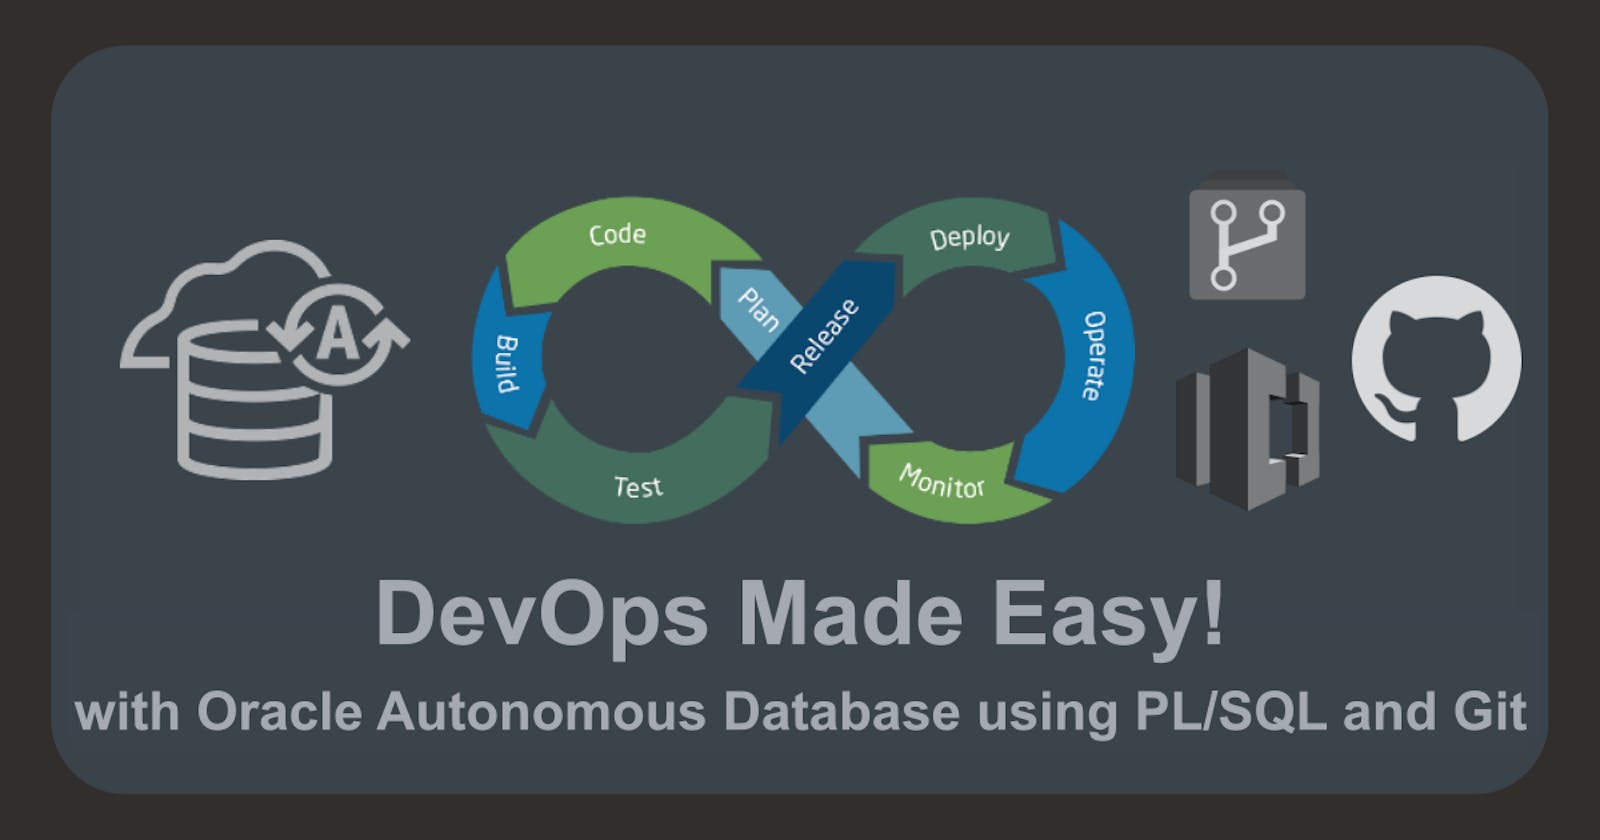 DevOps Made Easy! with Oracle Autonomous Database using PL/SQL and Git